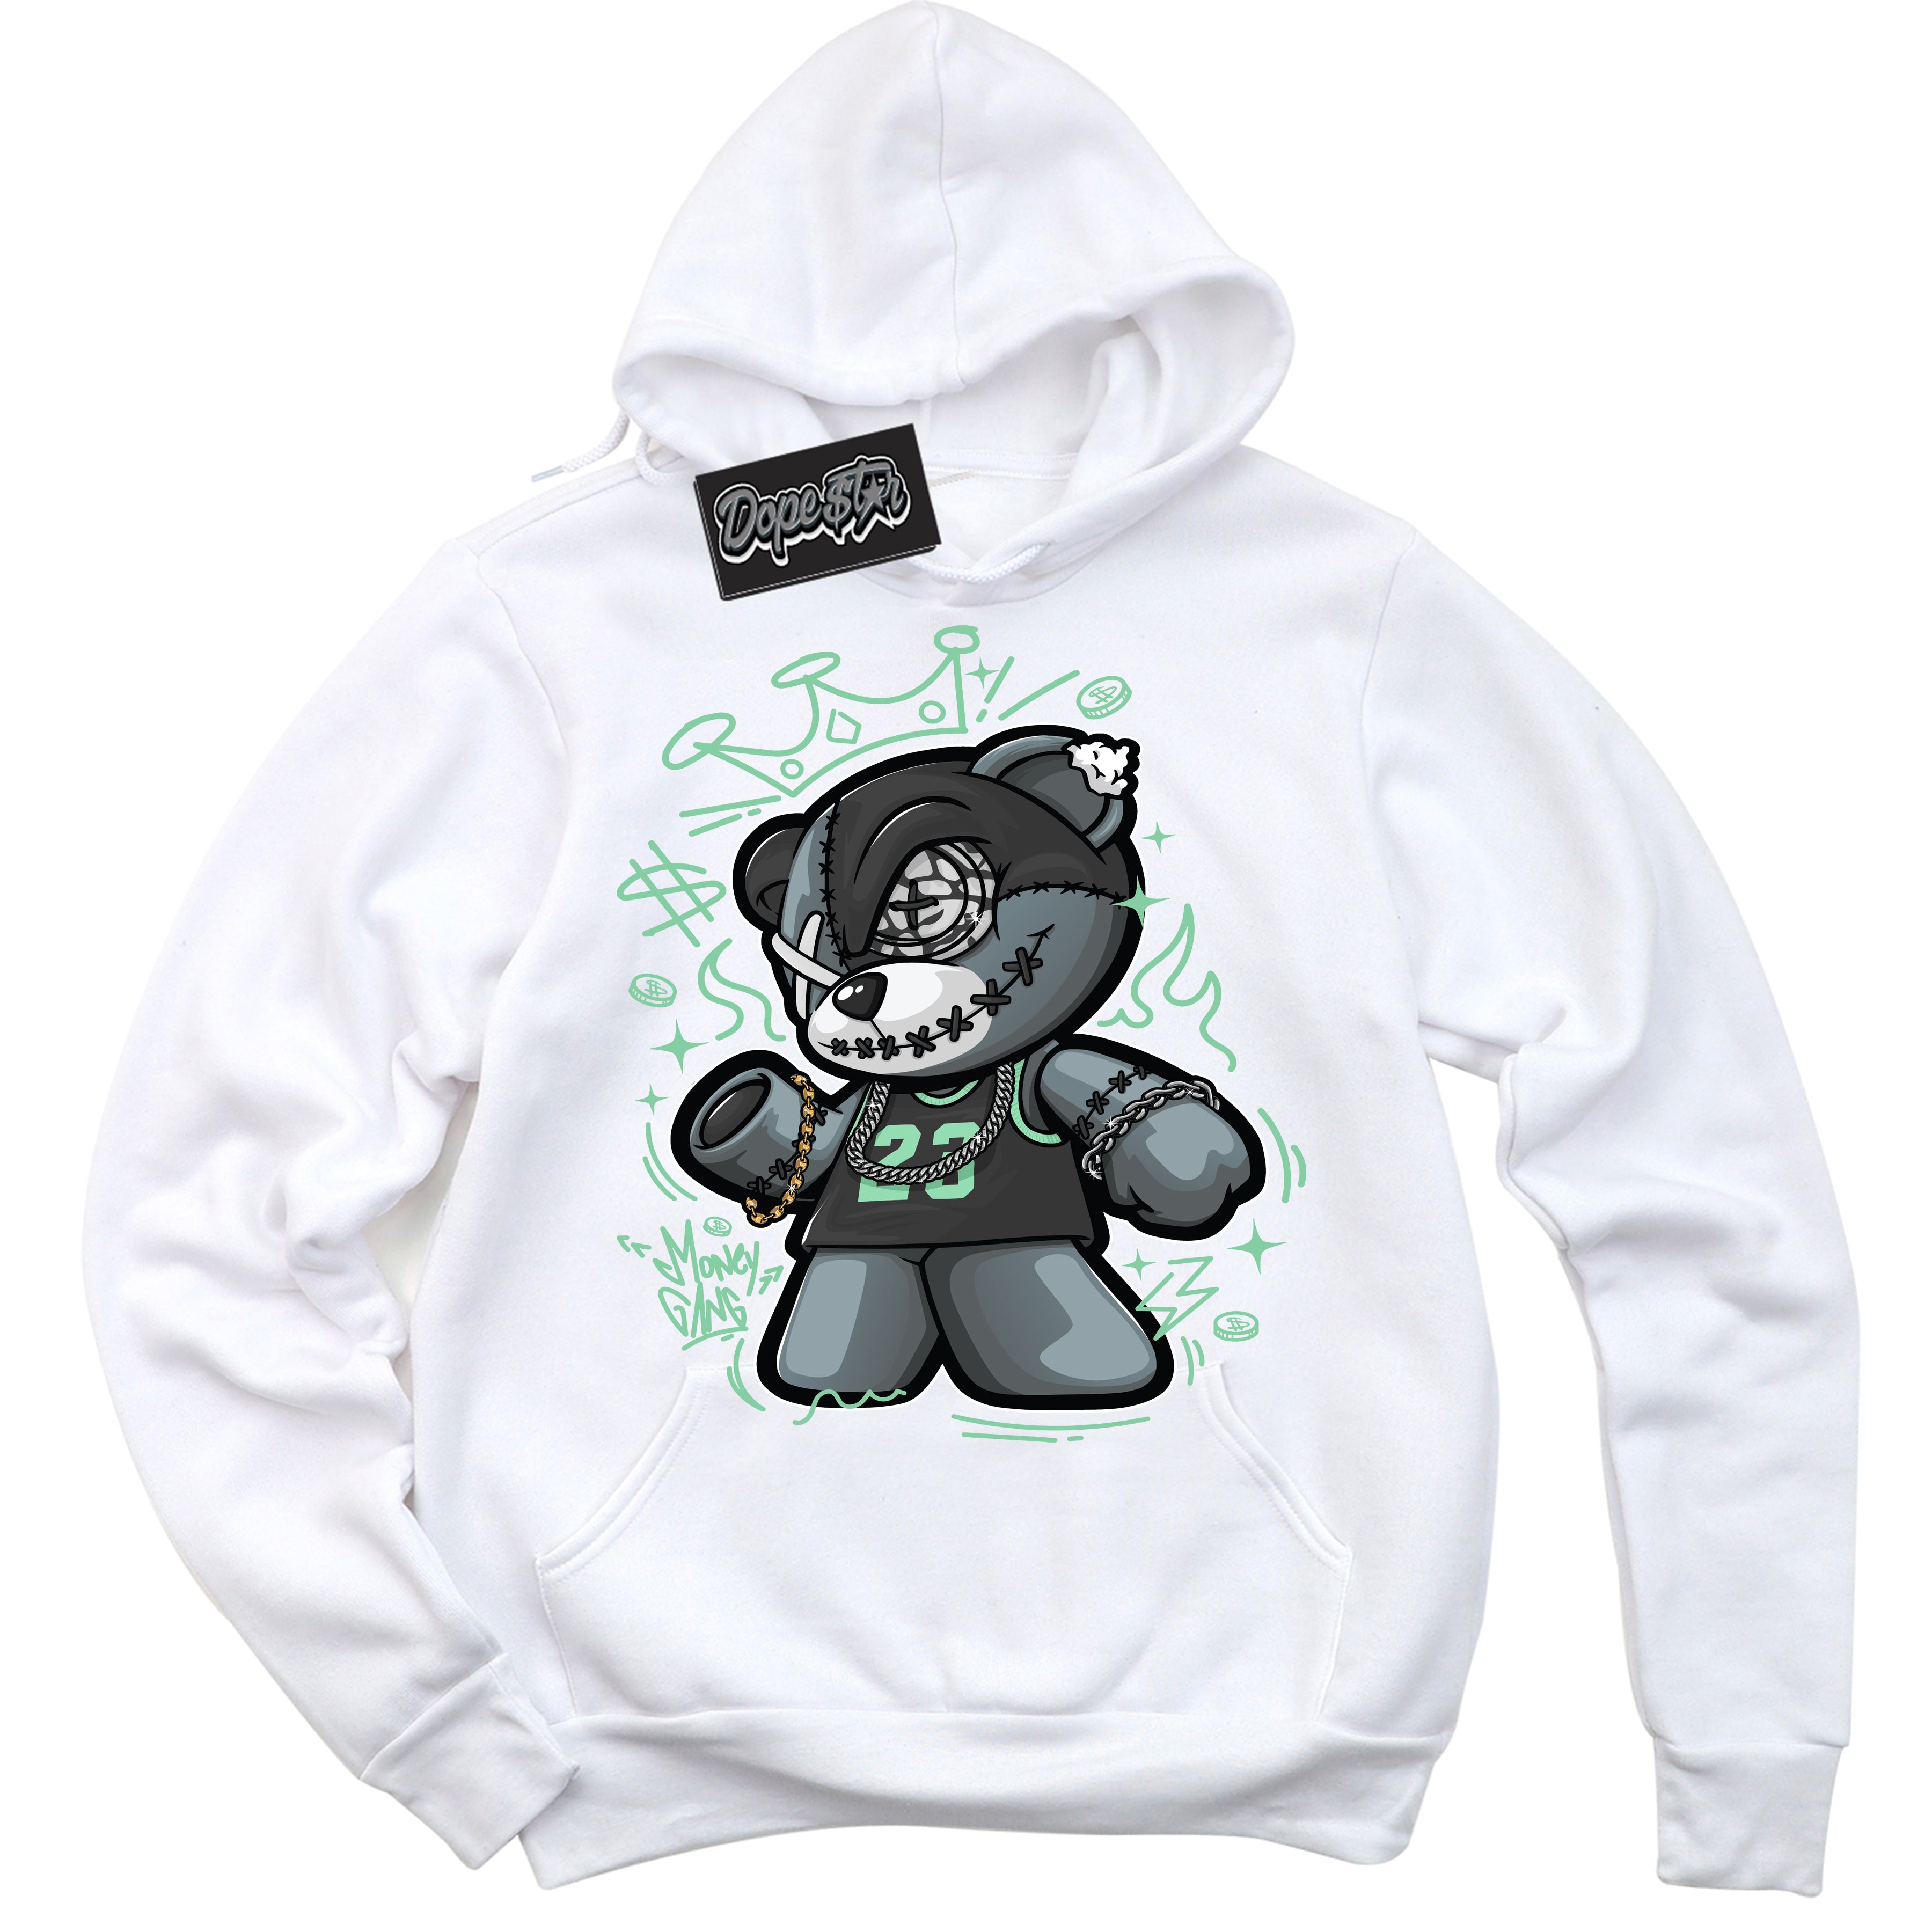 Cool White Graphic DopeStar Hoodie with “ Money Gang Bear “ print, that perfectly matches Green Glow 3s sneakers